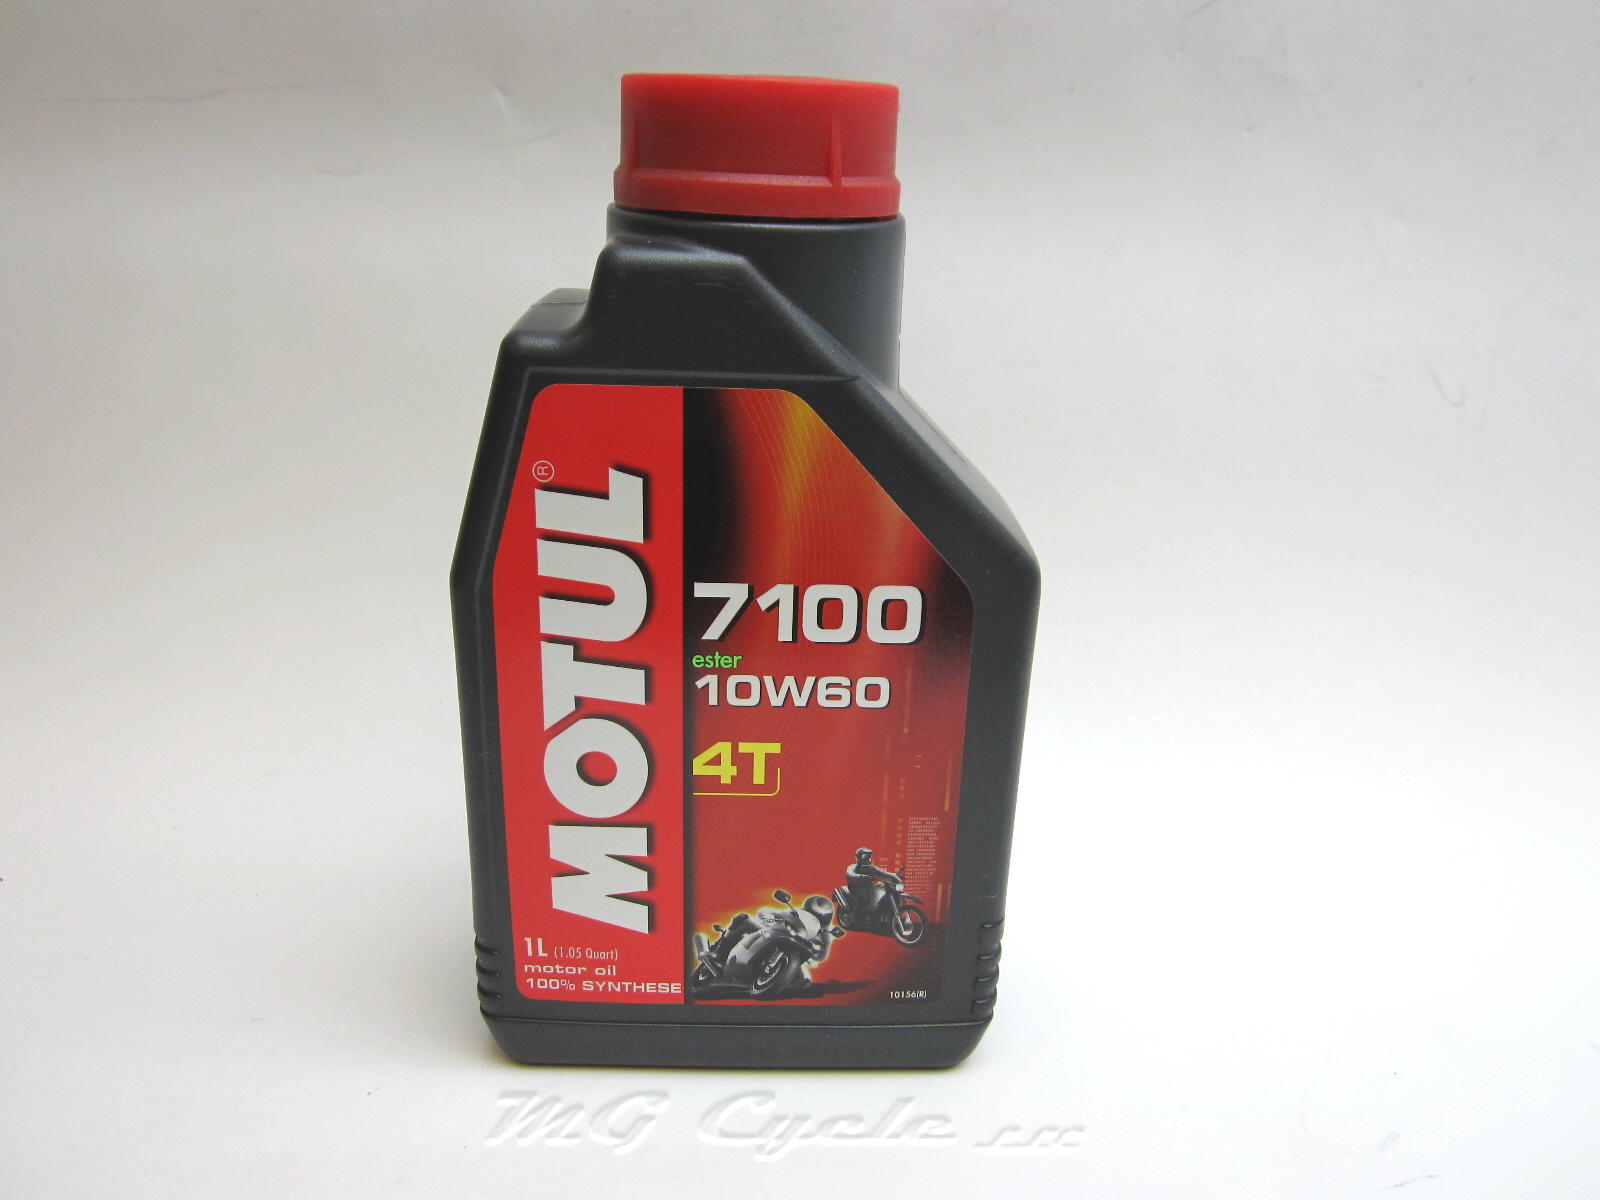 1 Liter Motul 7100 4T 10W60 synthetic ester motor oil - Click Image to Close